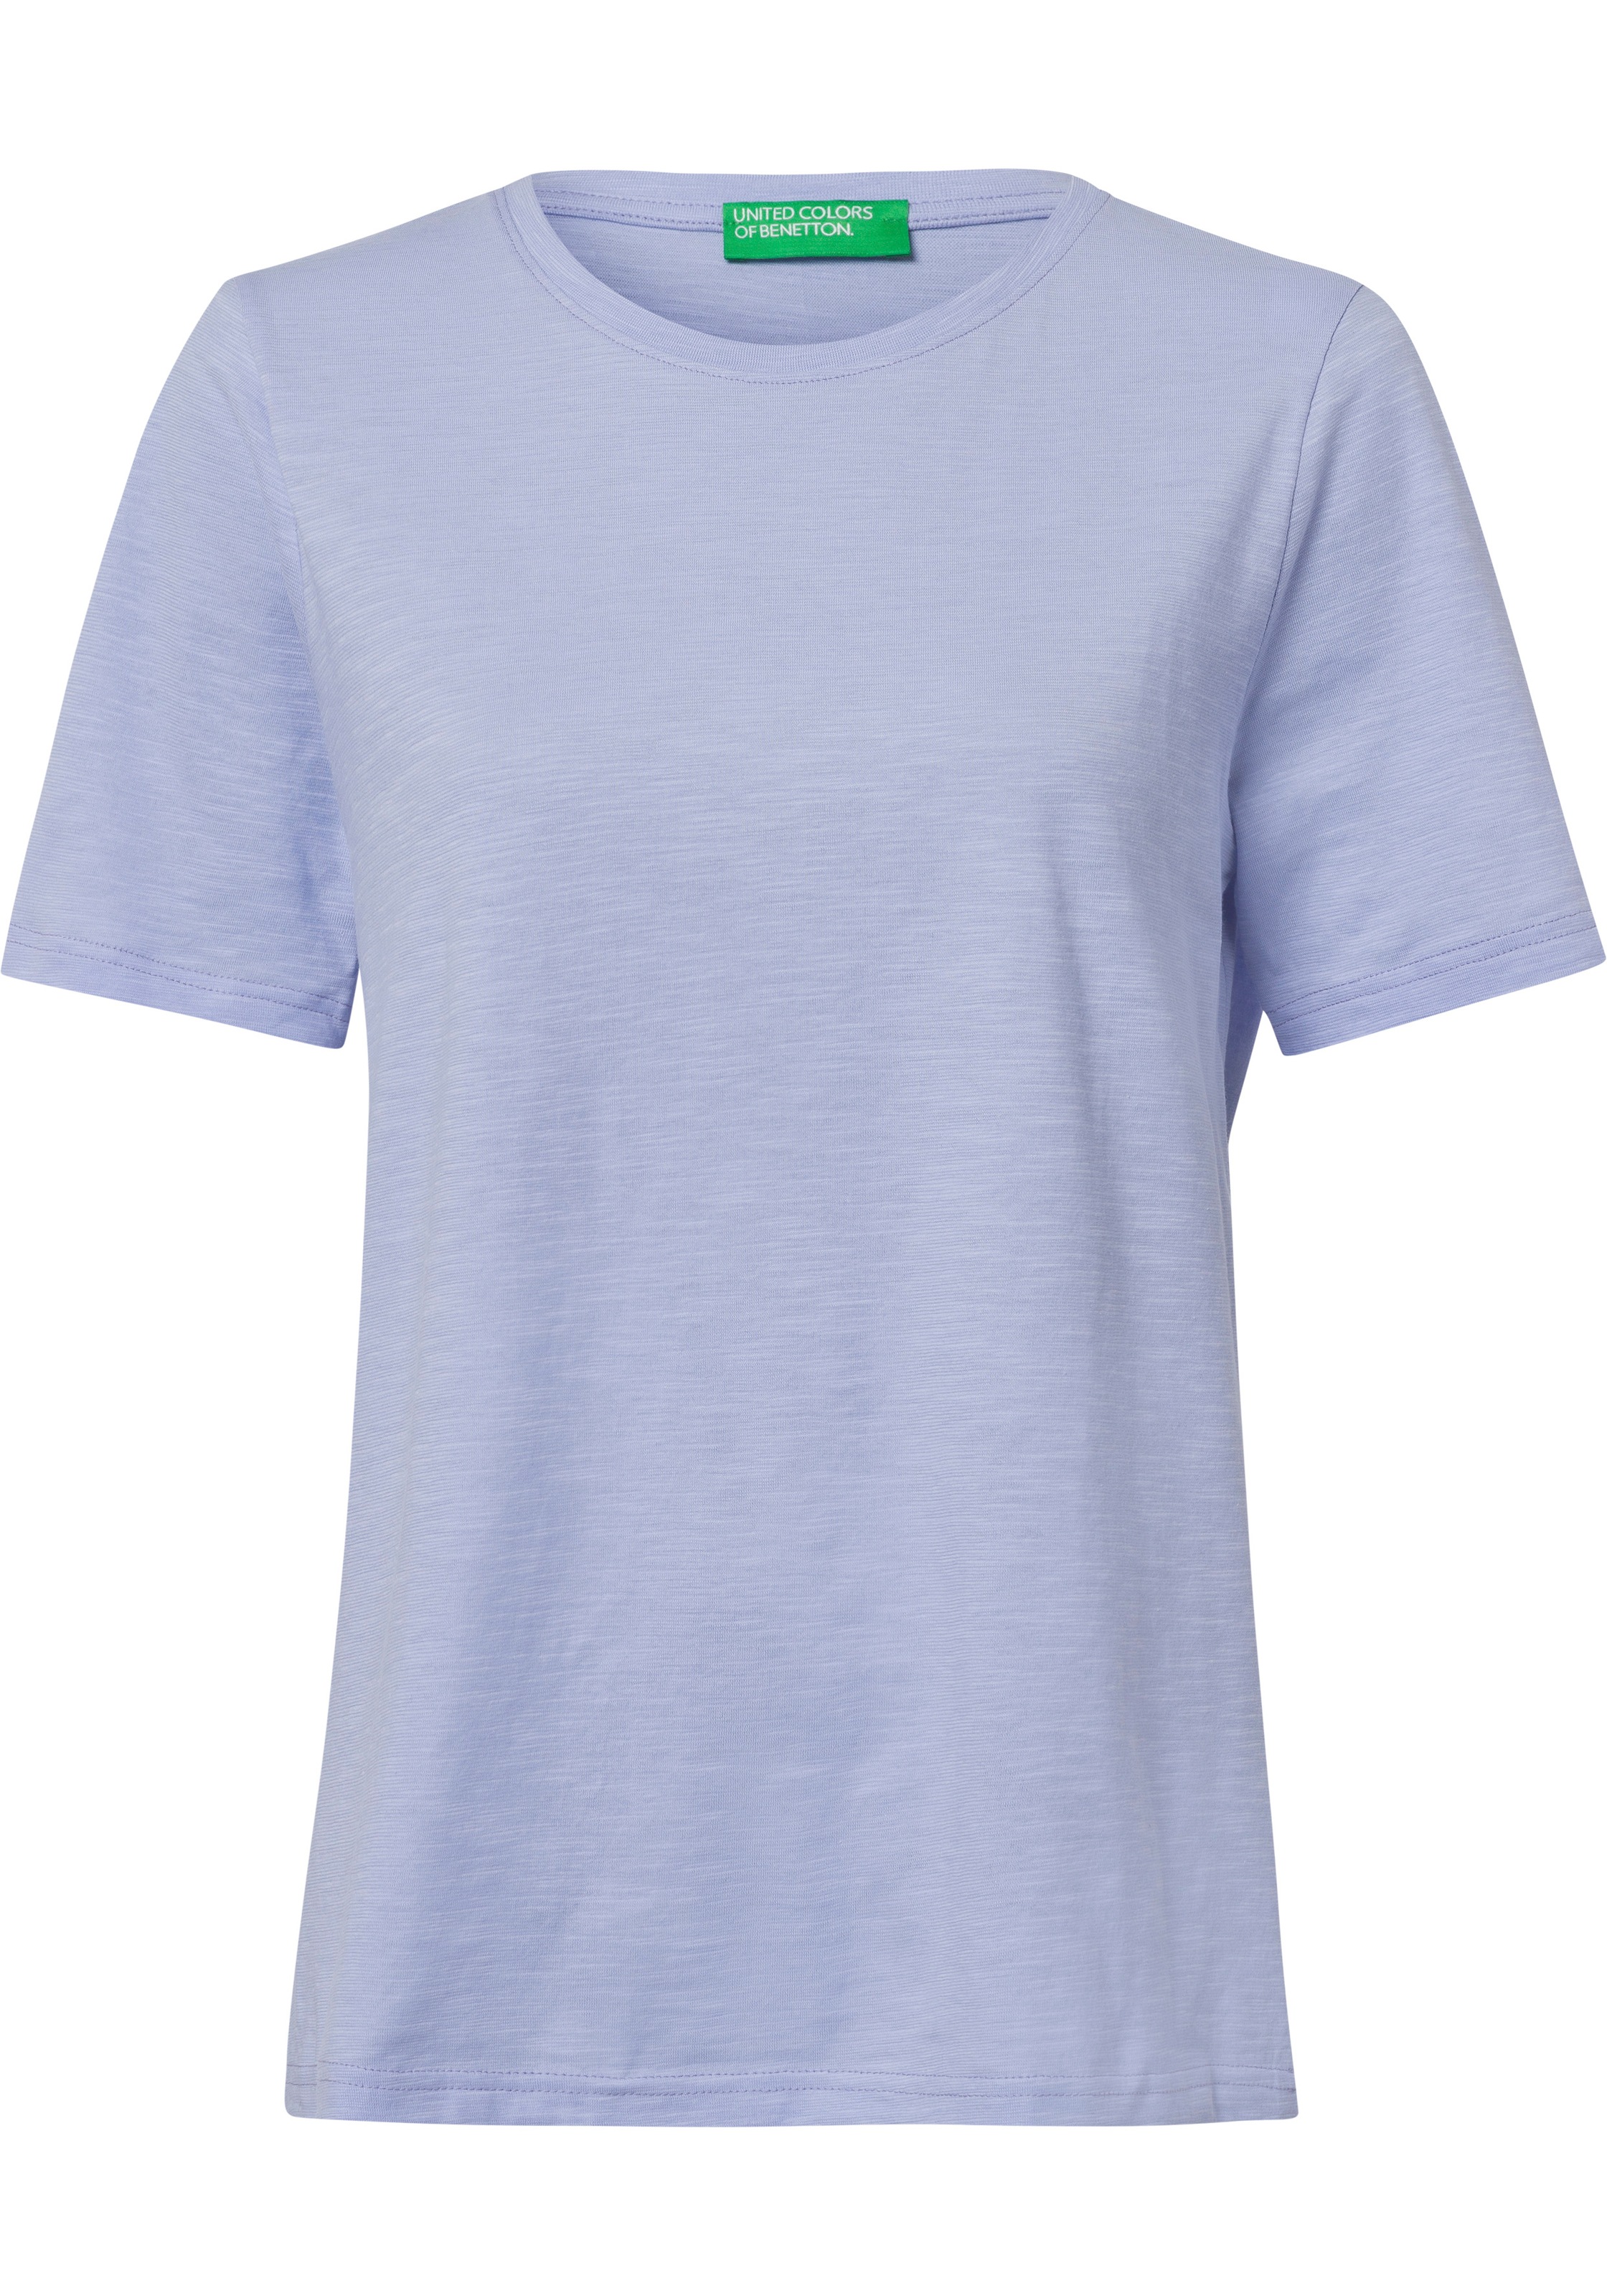 United Colors ♕ T-Shirt, in of Benetton cleaner Basic-Optik bei